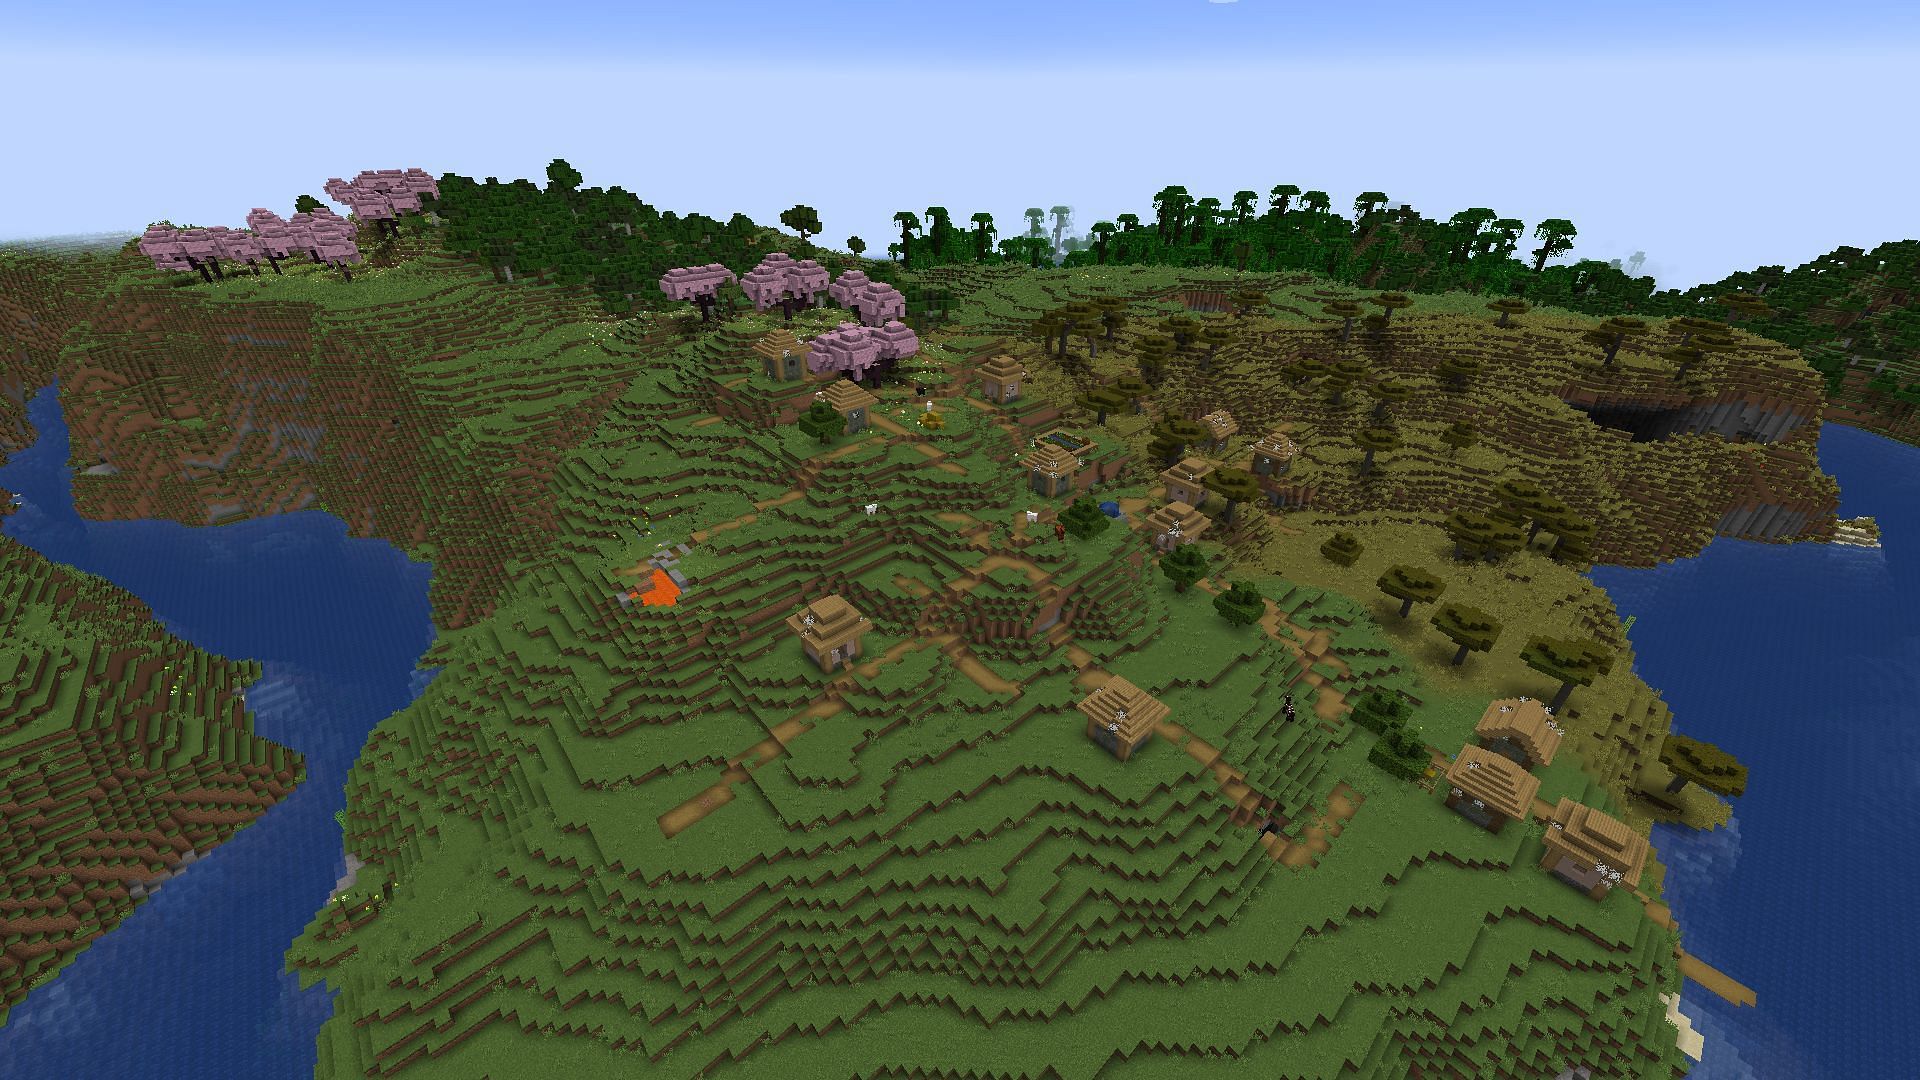 This seed&#039;s village could use a little love and care by the player spawning into it (Image via Mojang)